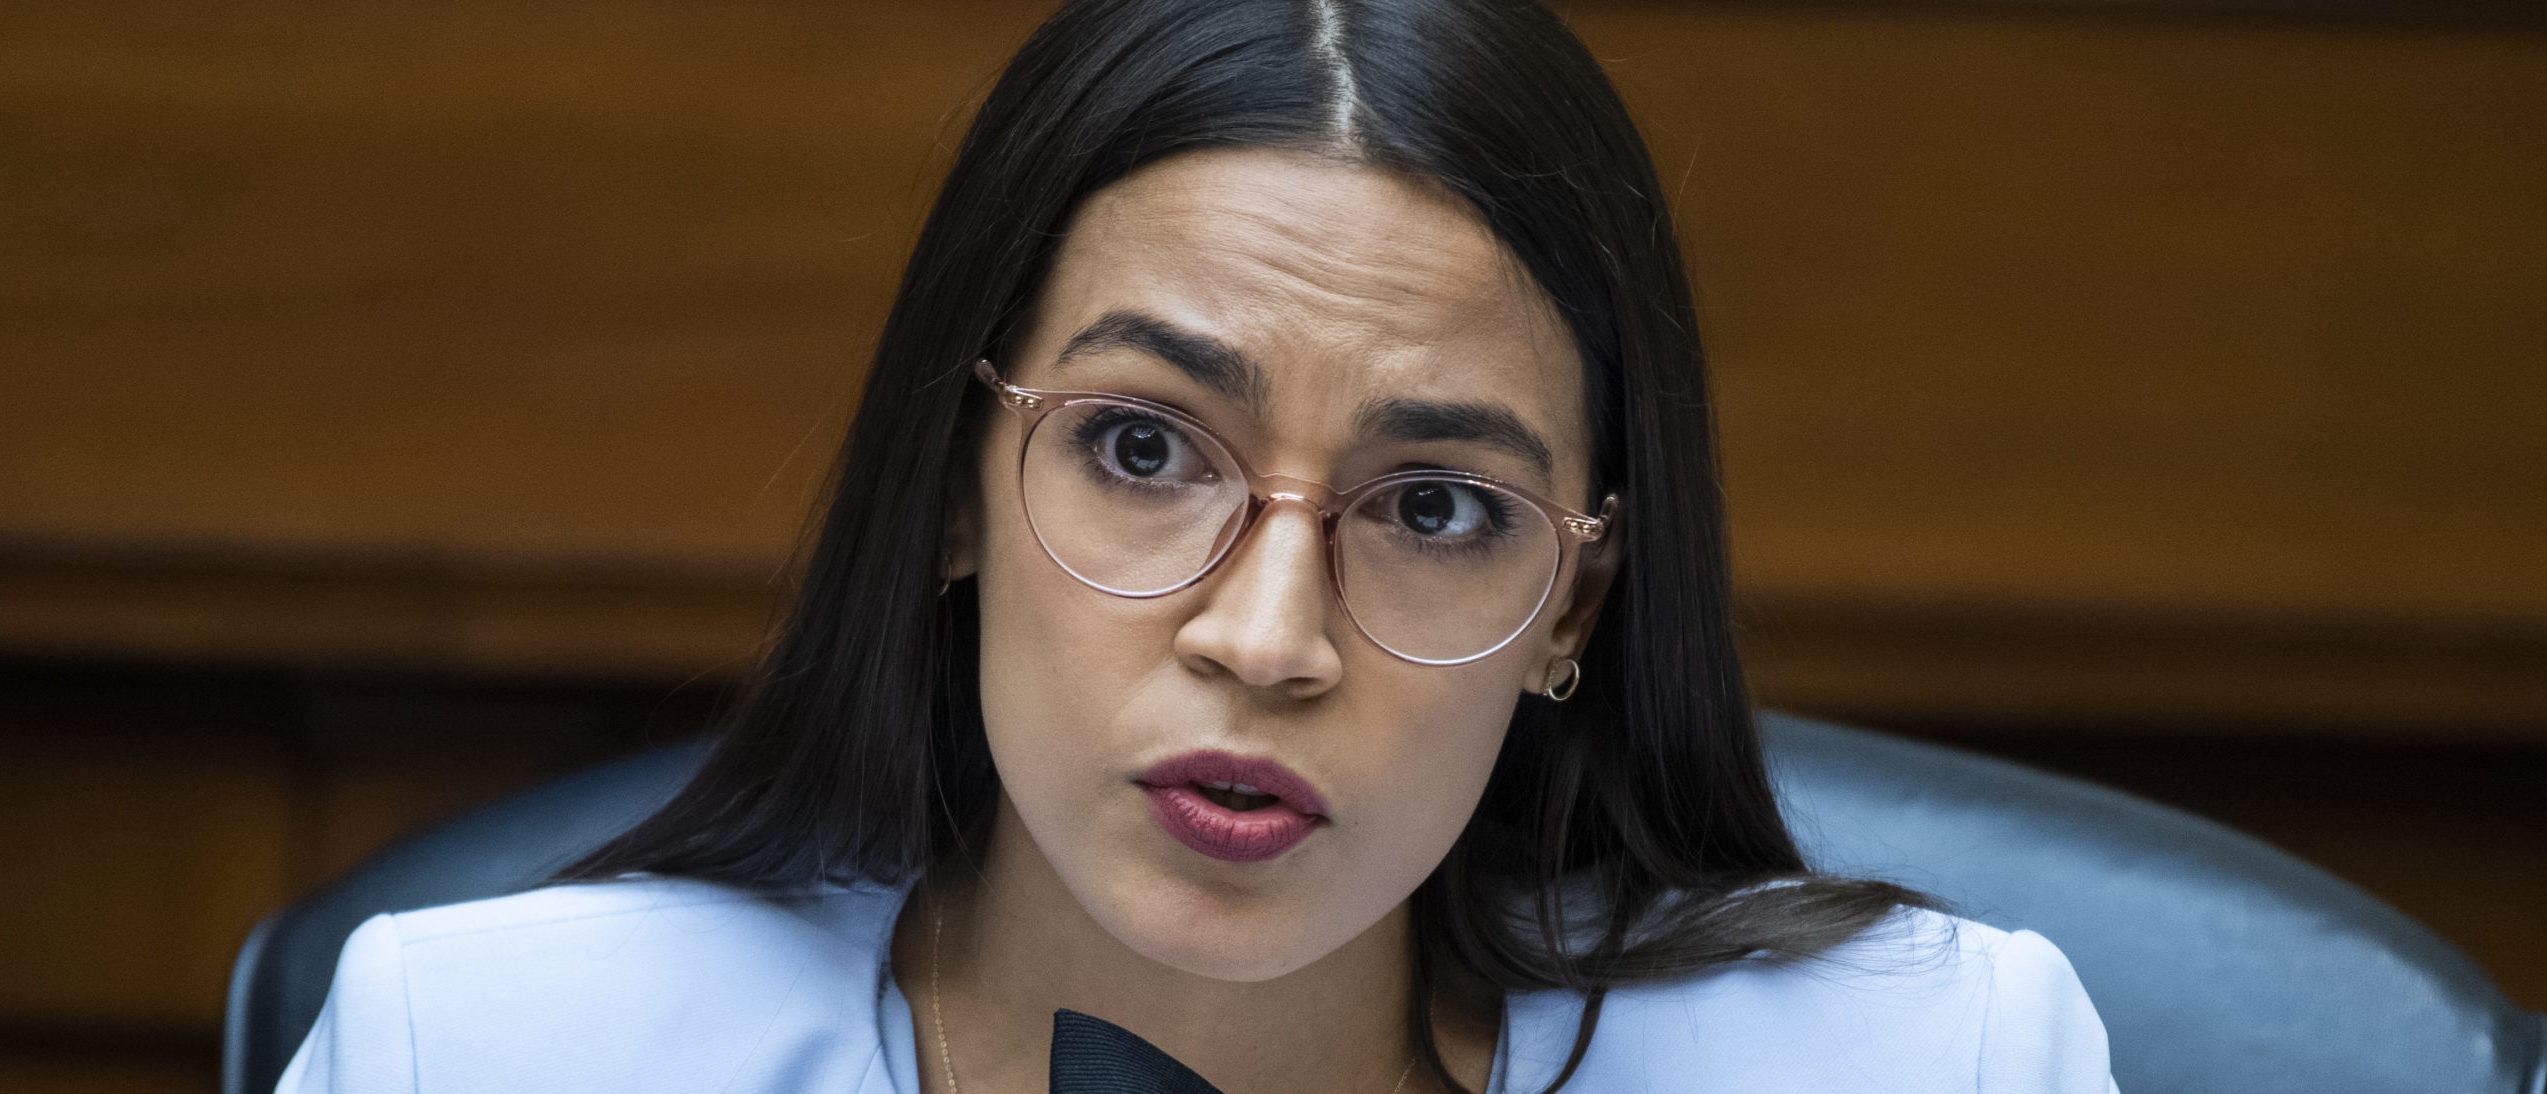 Rep. Alexandria Ocasio-Cortez (D-NY) questions Postmaster General Louis DeJoy during a hearing before the House Oversight and Reform Committee on August 24, 2020 in Washington, DC. (Tom Williams-Pool/Getty Images)